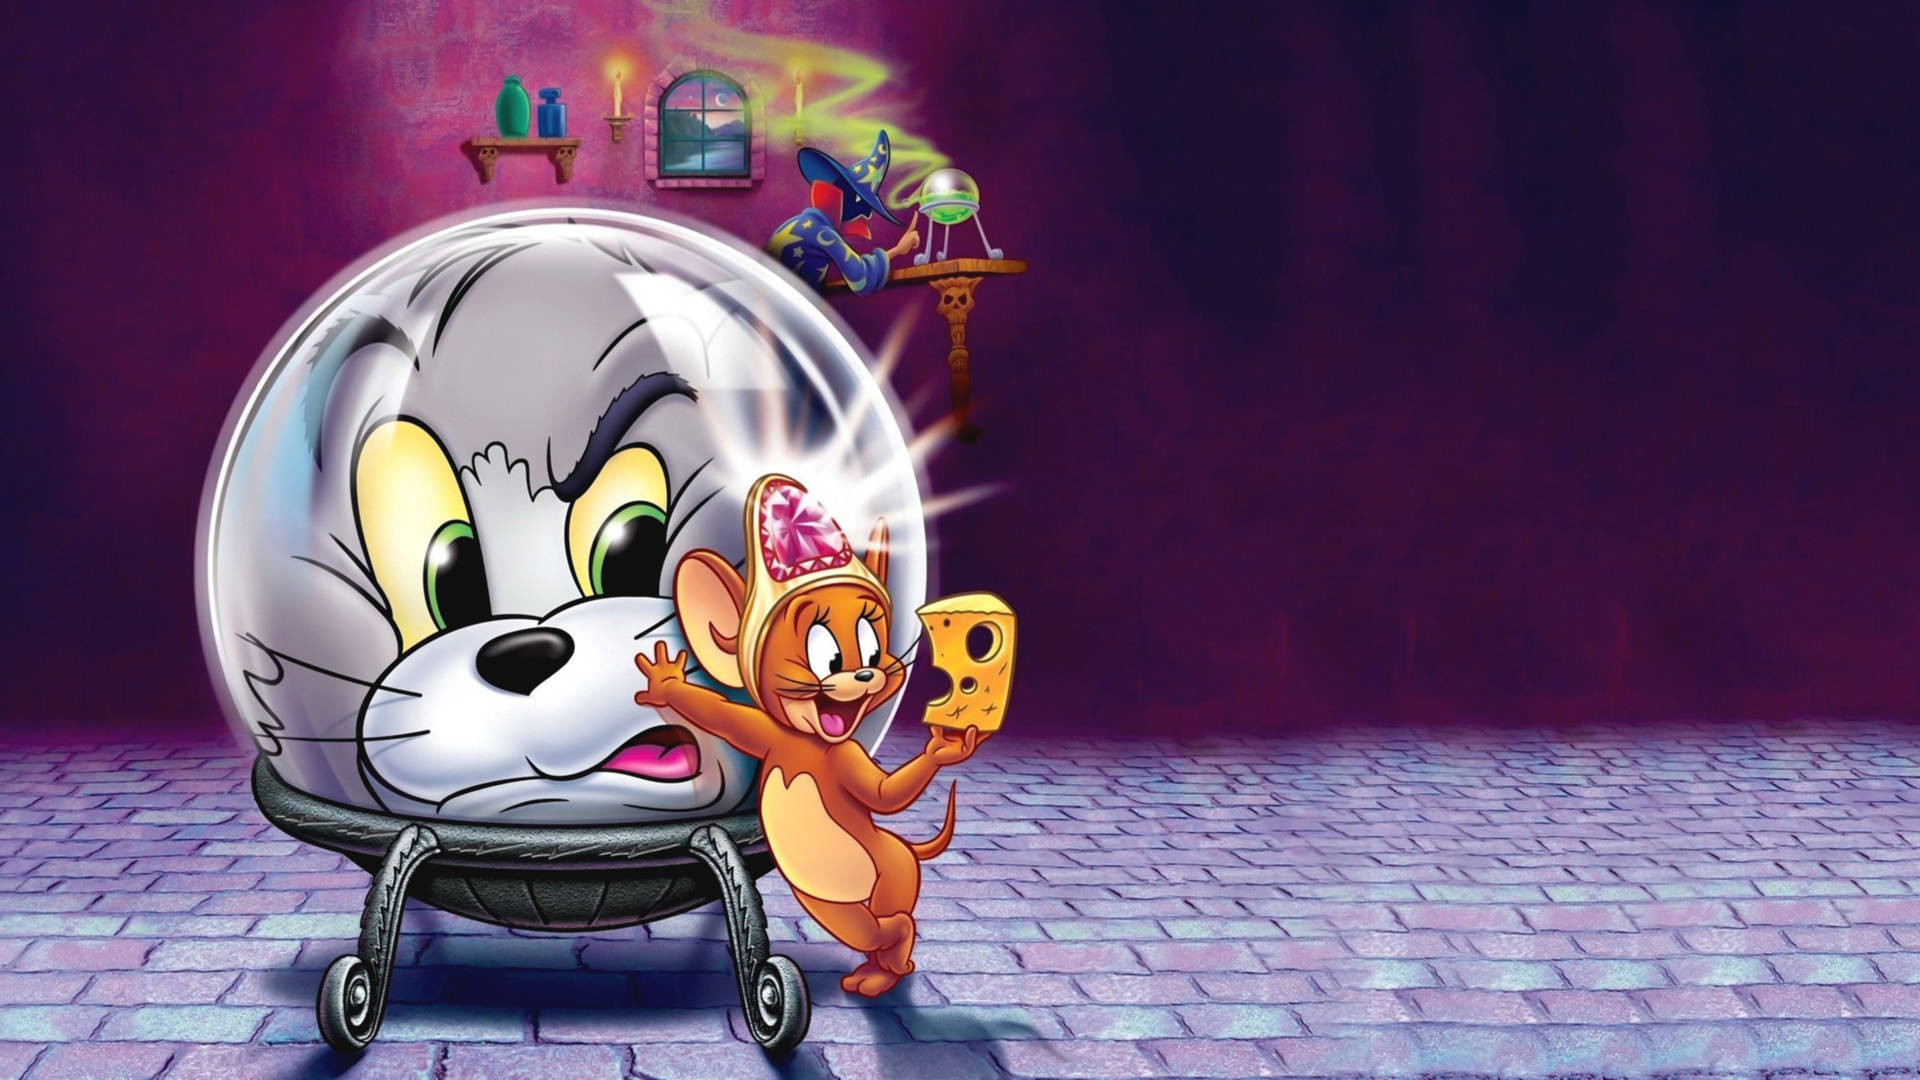 Tom And Jerry Mouse Magic Ring Wallpaper